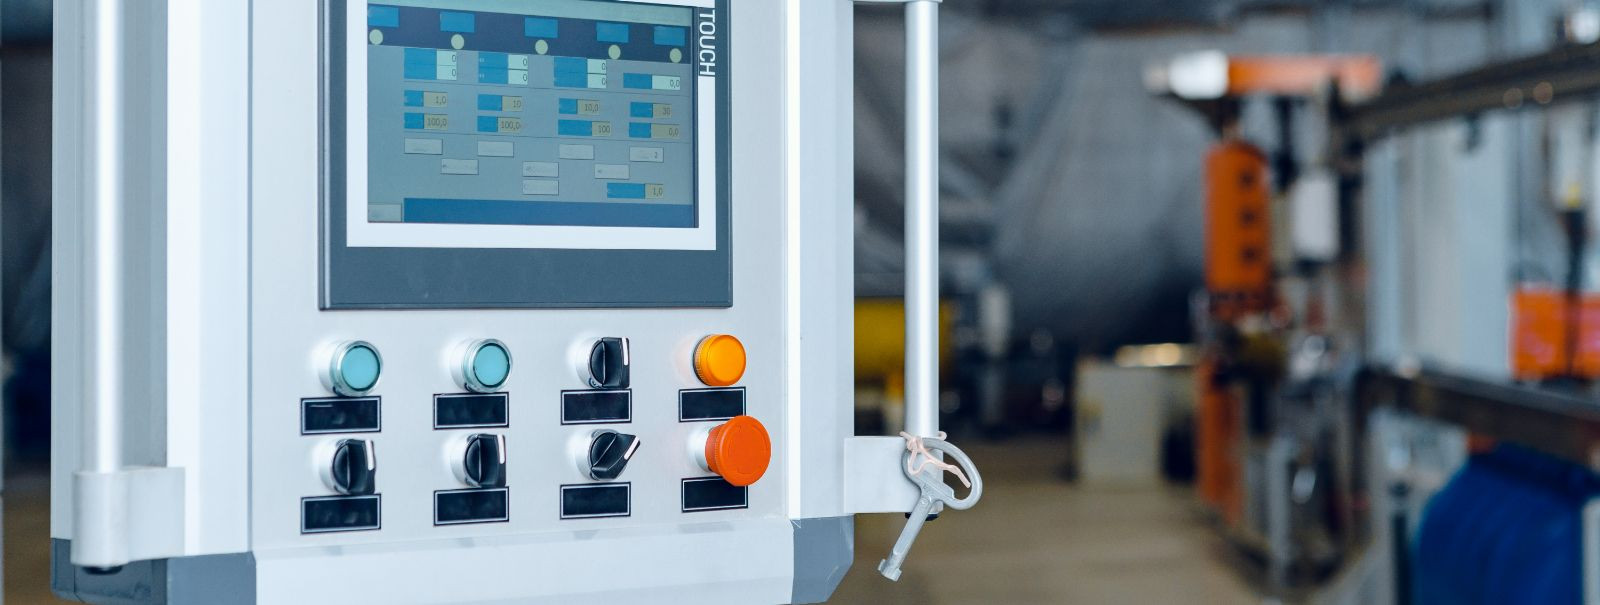 Industrial automation systems are the backbone of modern manufacturing and production facilities. However, as technology advances, systems that were once cuttin